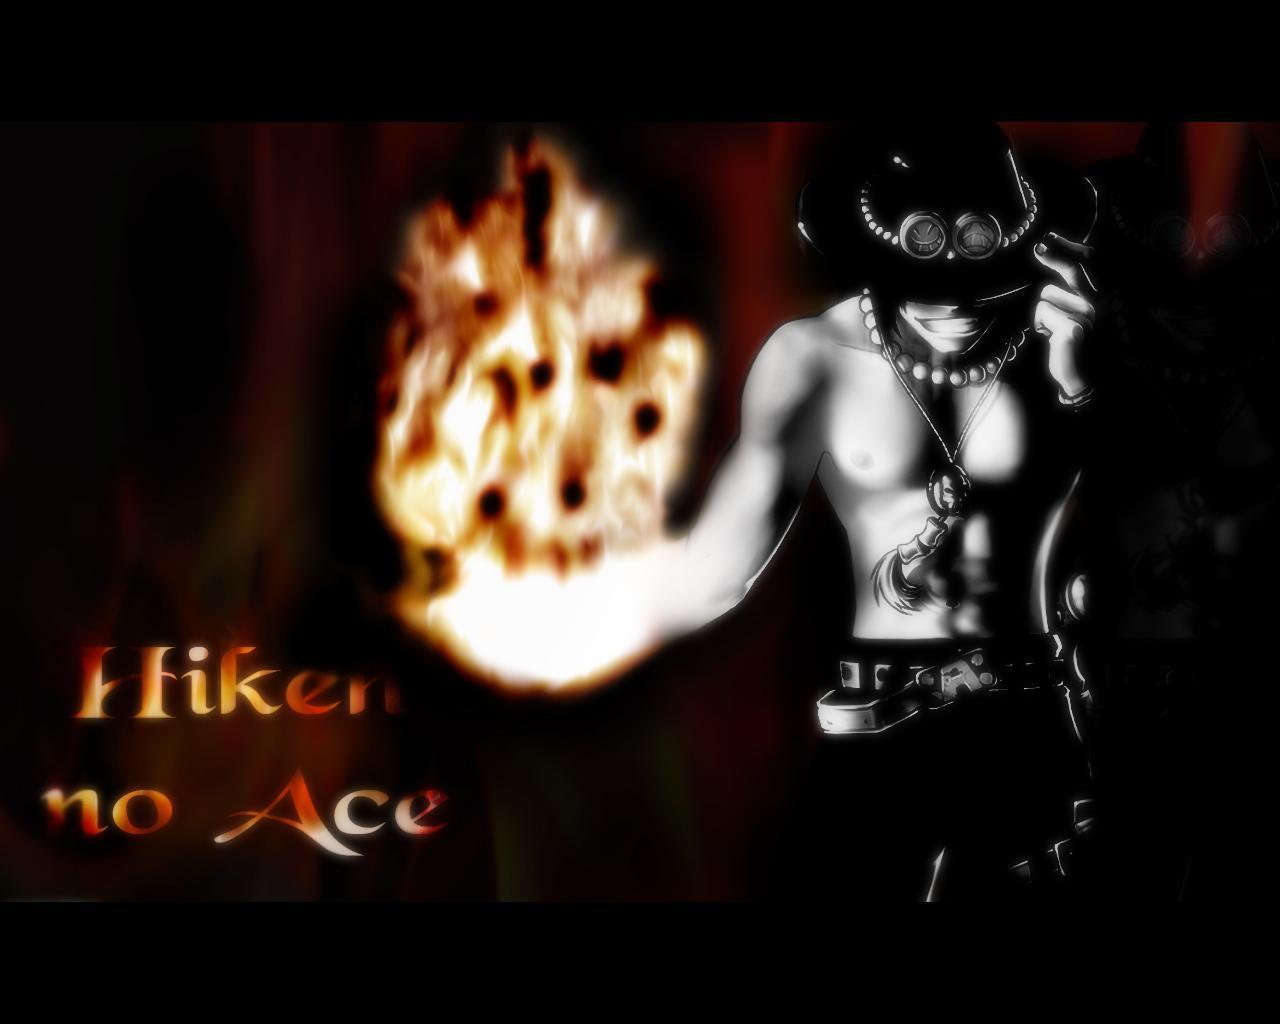 Portgas D. Ace black Wallpaper from One Piece Anime. One Piec